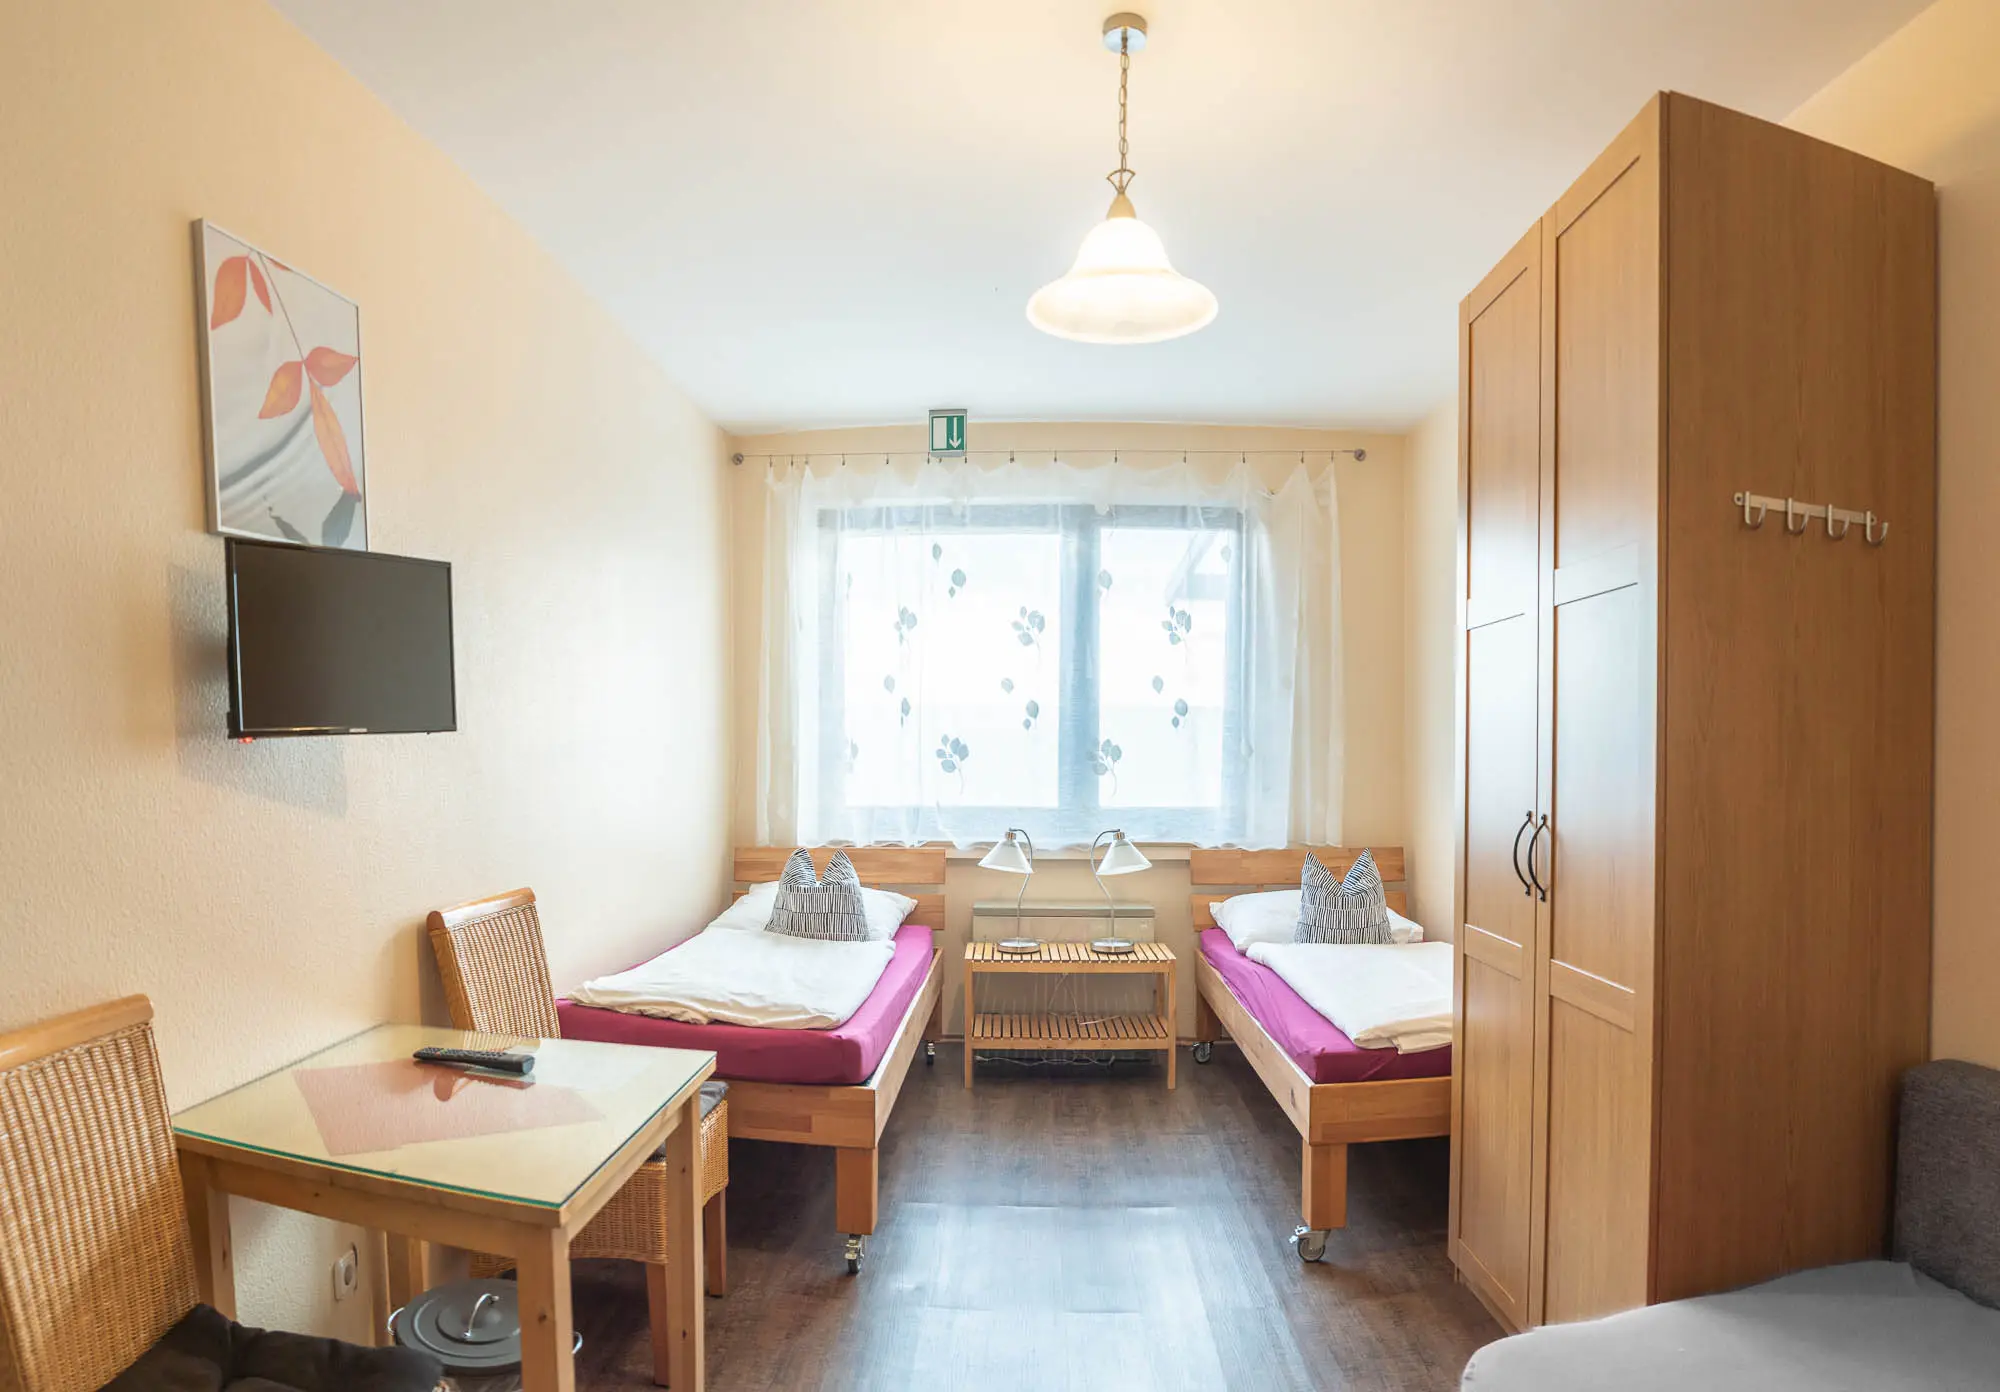 Apartments with bathroom and kitchenettes in Leverkusen